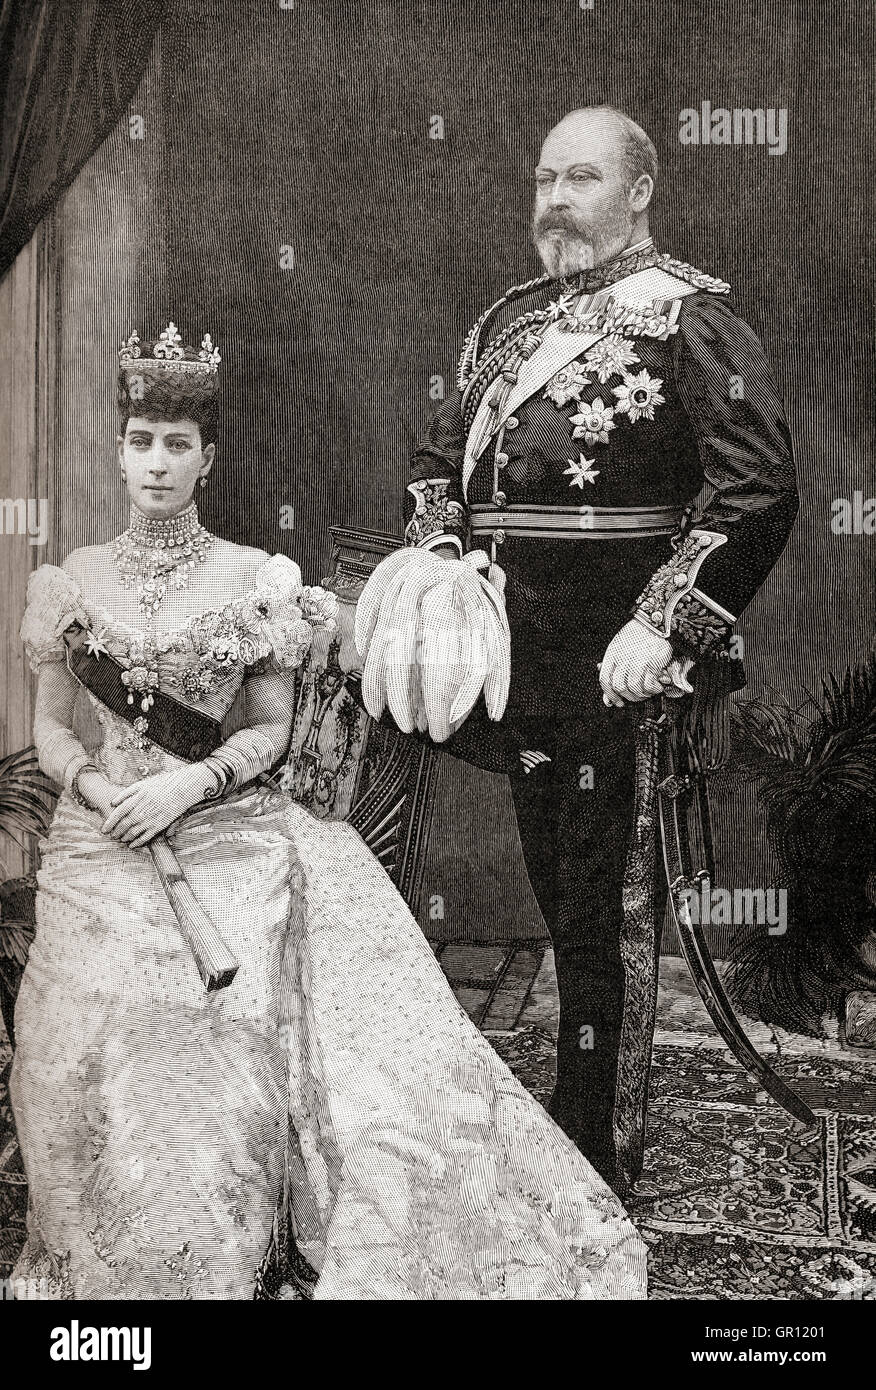 King Edward VII and Queen Alexandra.  Edward VII, 1841 – 1910.  King of the United Kingdom and the British Dominions and Emperor of India.  Alexandra of Denmark, 1844 – 1925.  Queen consort of the United Kingdom of Great Britain and Ireland and Empress consort of India as the wife of King-Emperor Edward VII. Stock Photo